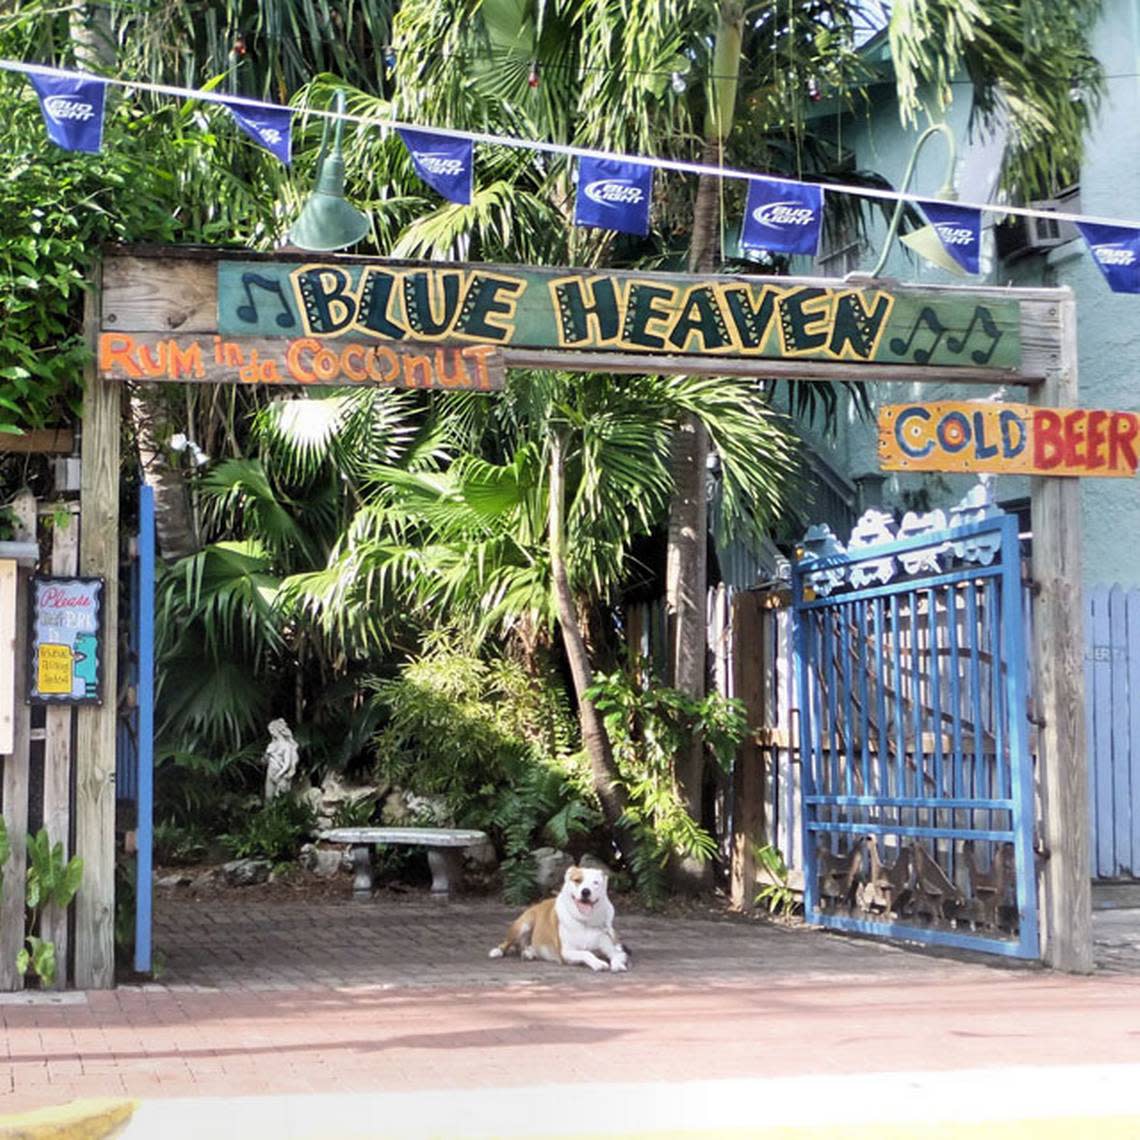 Blue Heaven restaurant in Key West is located in the historic Bahama Village.